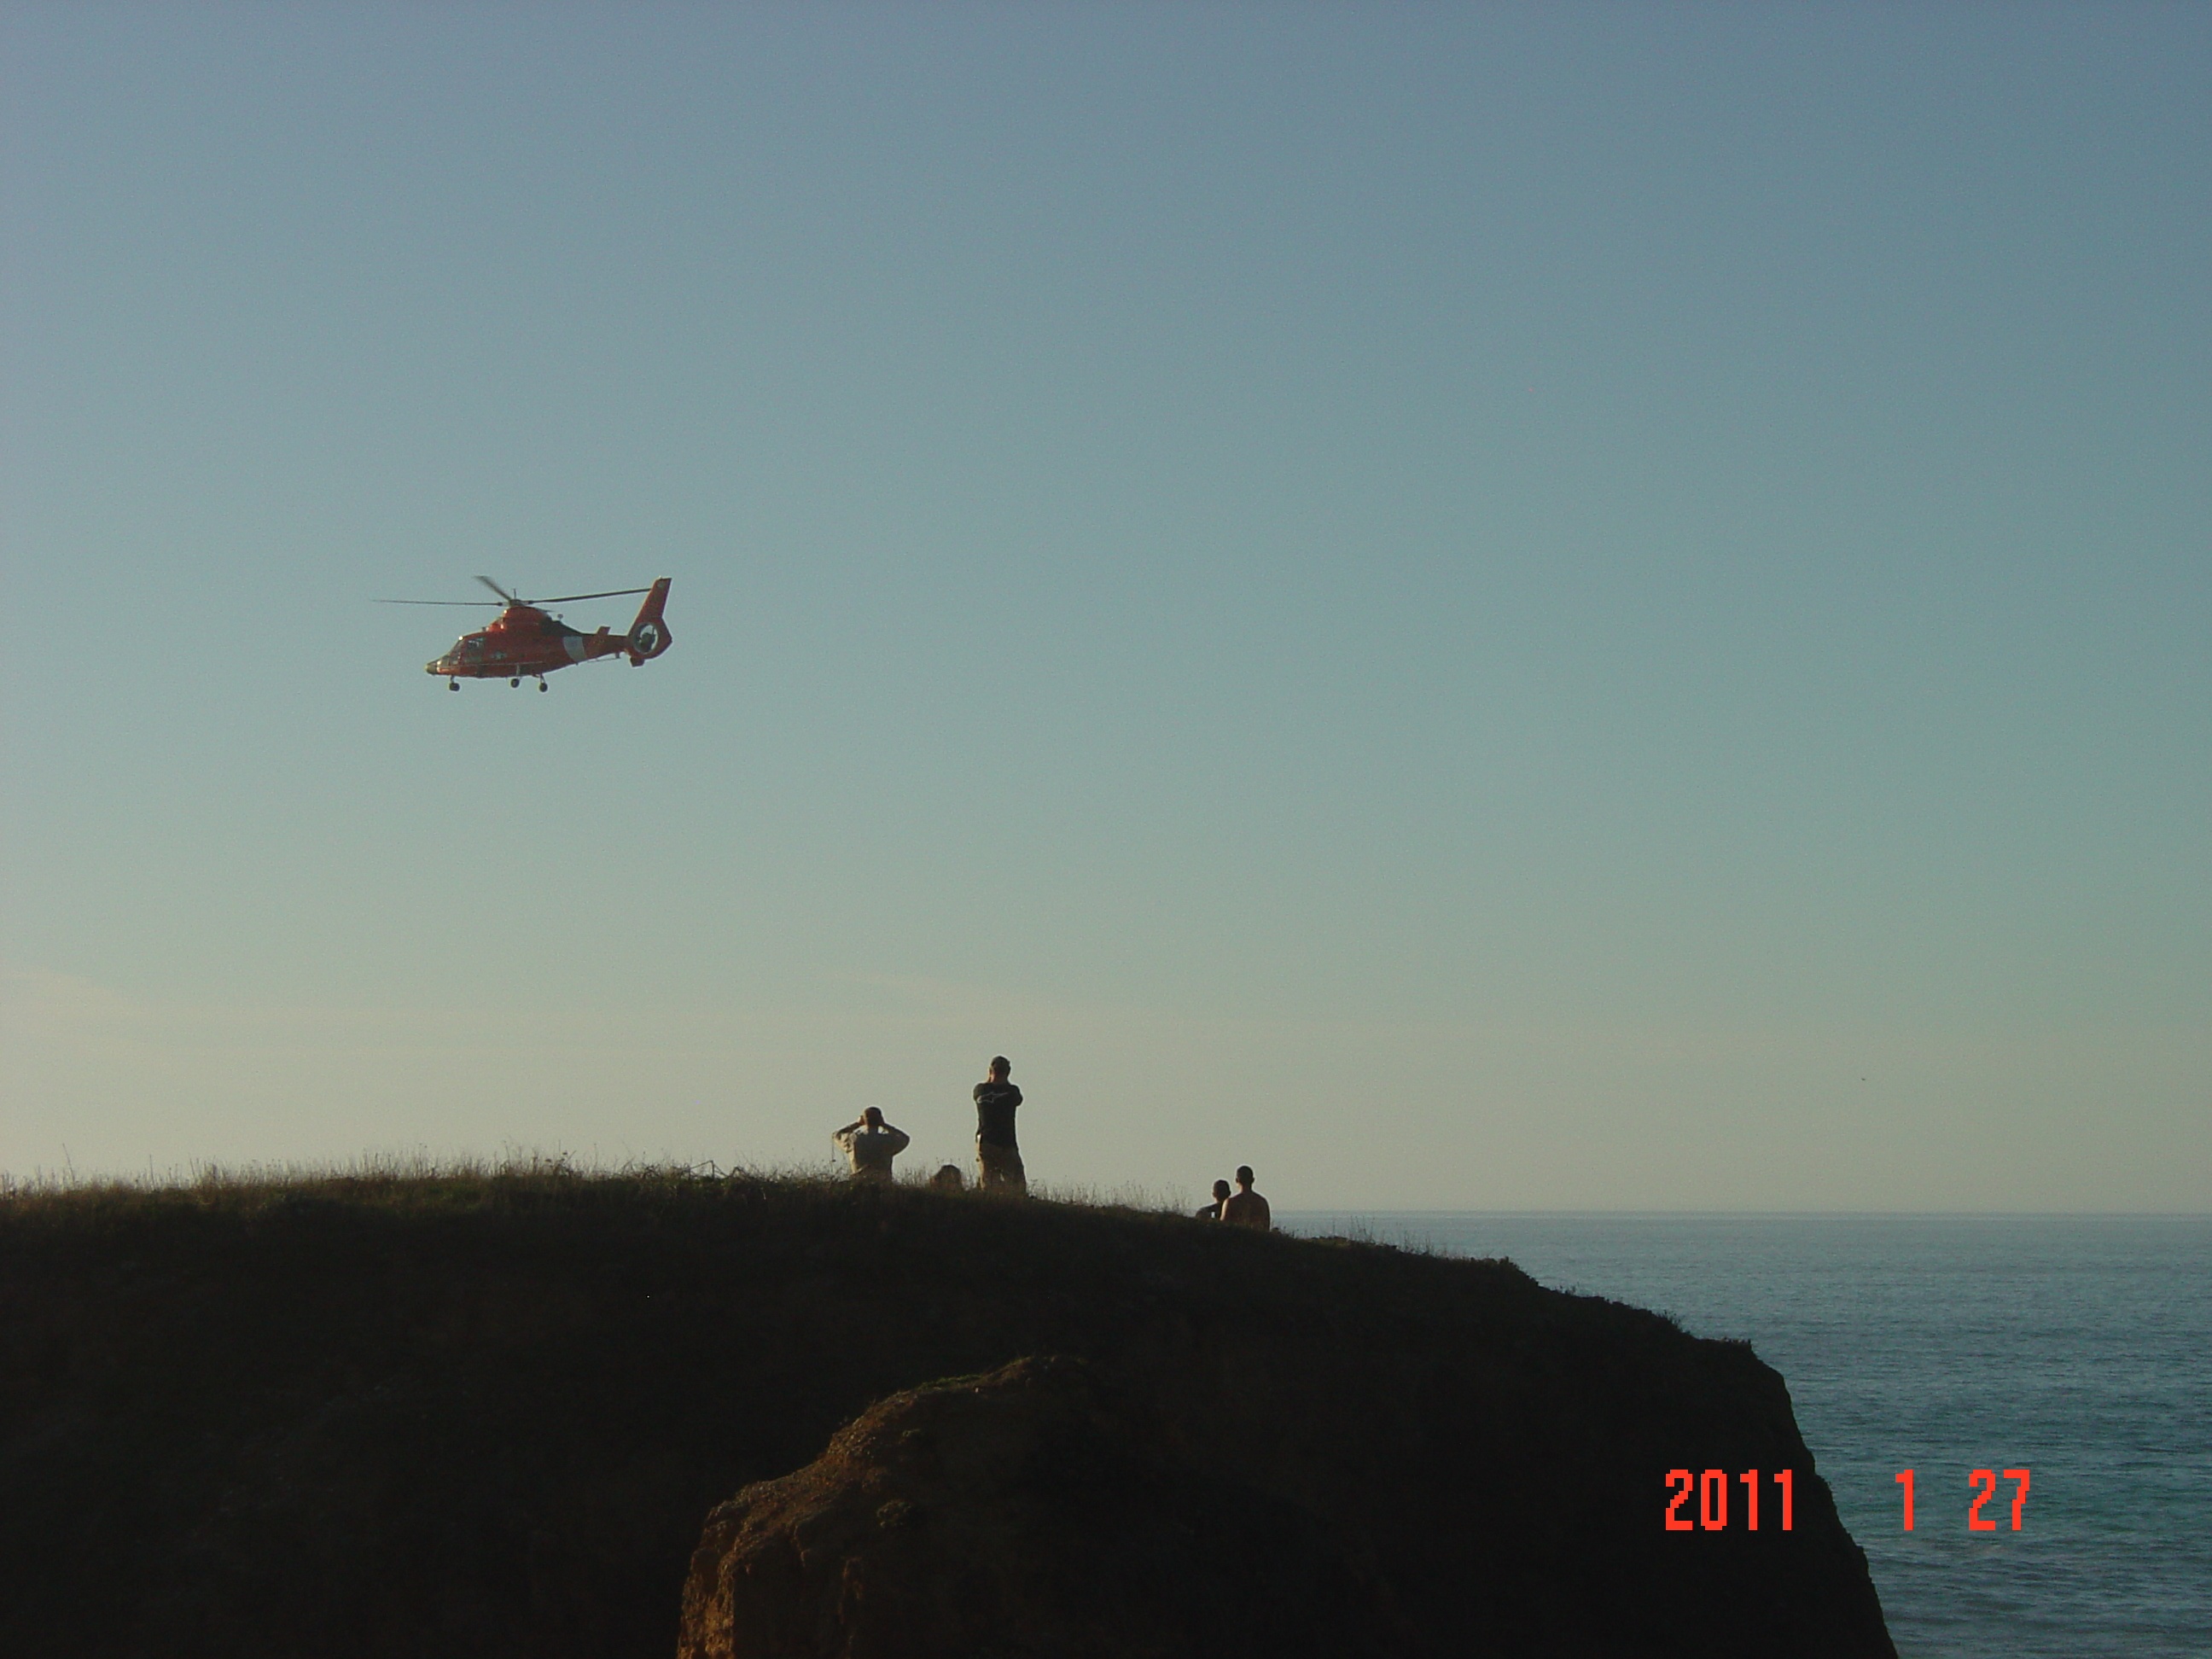 Coast Guard Helicopter trying to locate person in ocean